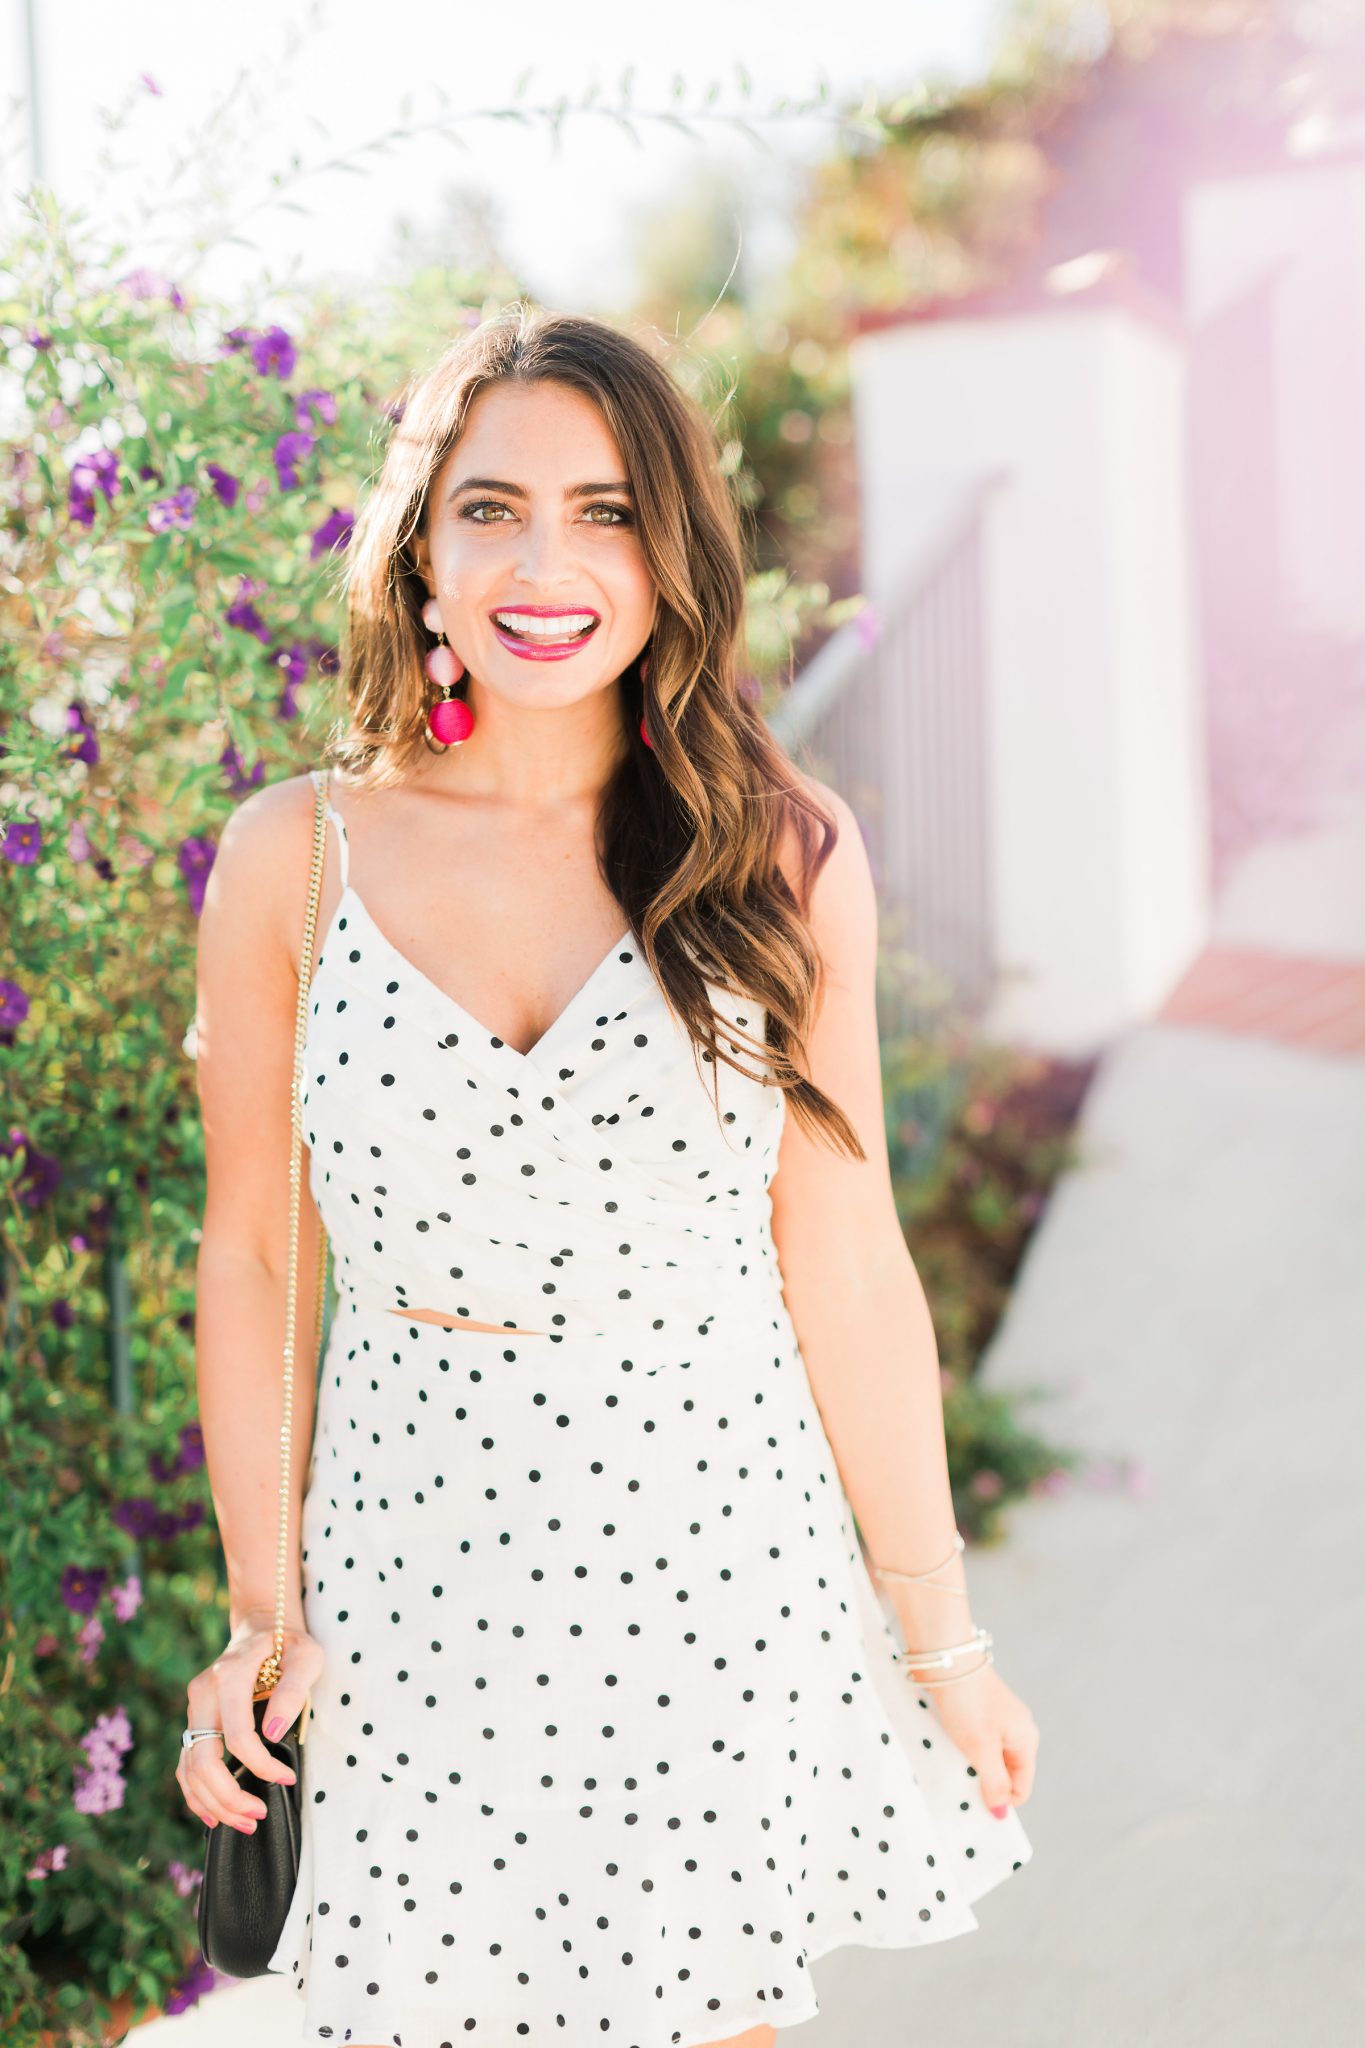 Black and white Polka dot crop top - Polka Dot Clothing styled by popular Orange County fashion blogger, Maxie Elle